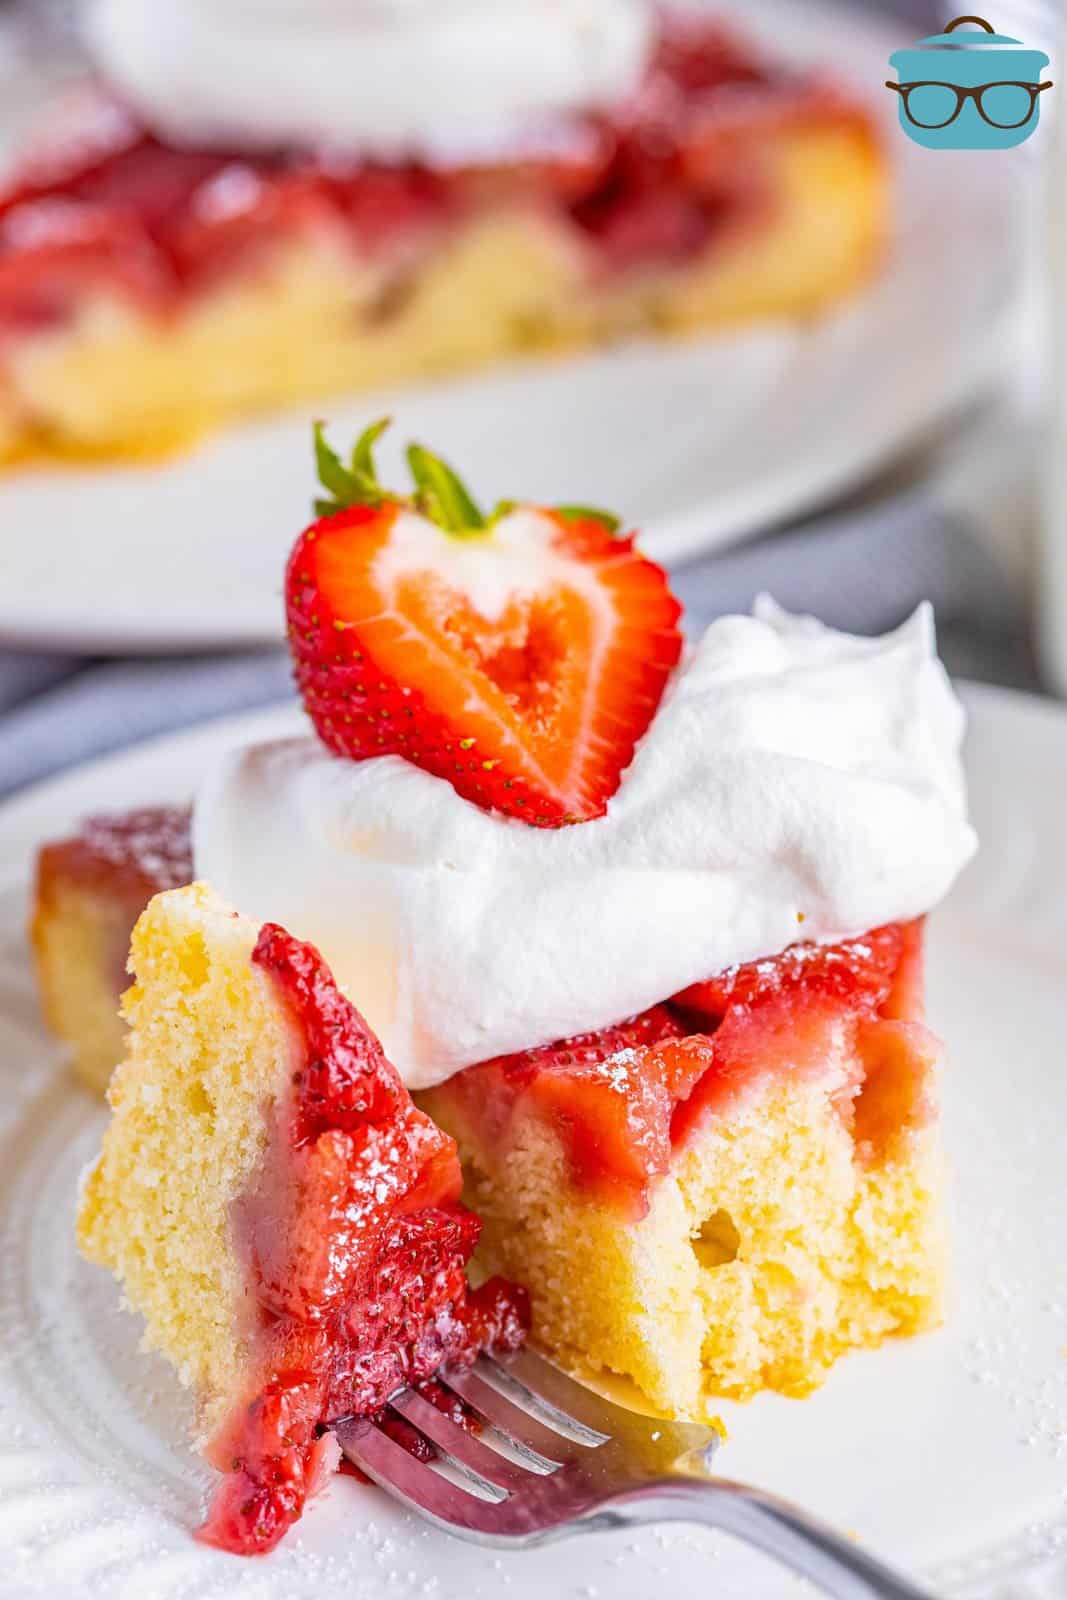 A plate with a piece of Strawberry Upside Down Cake with a fork in it.